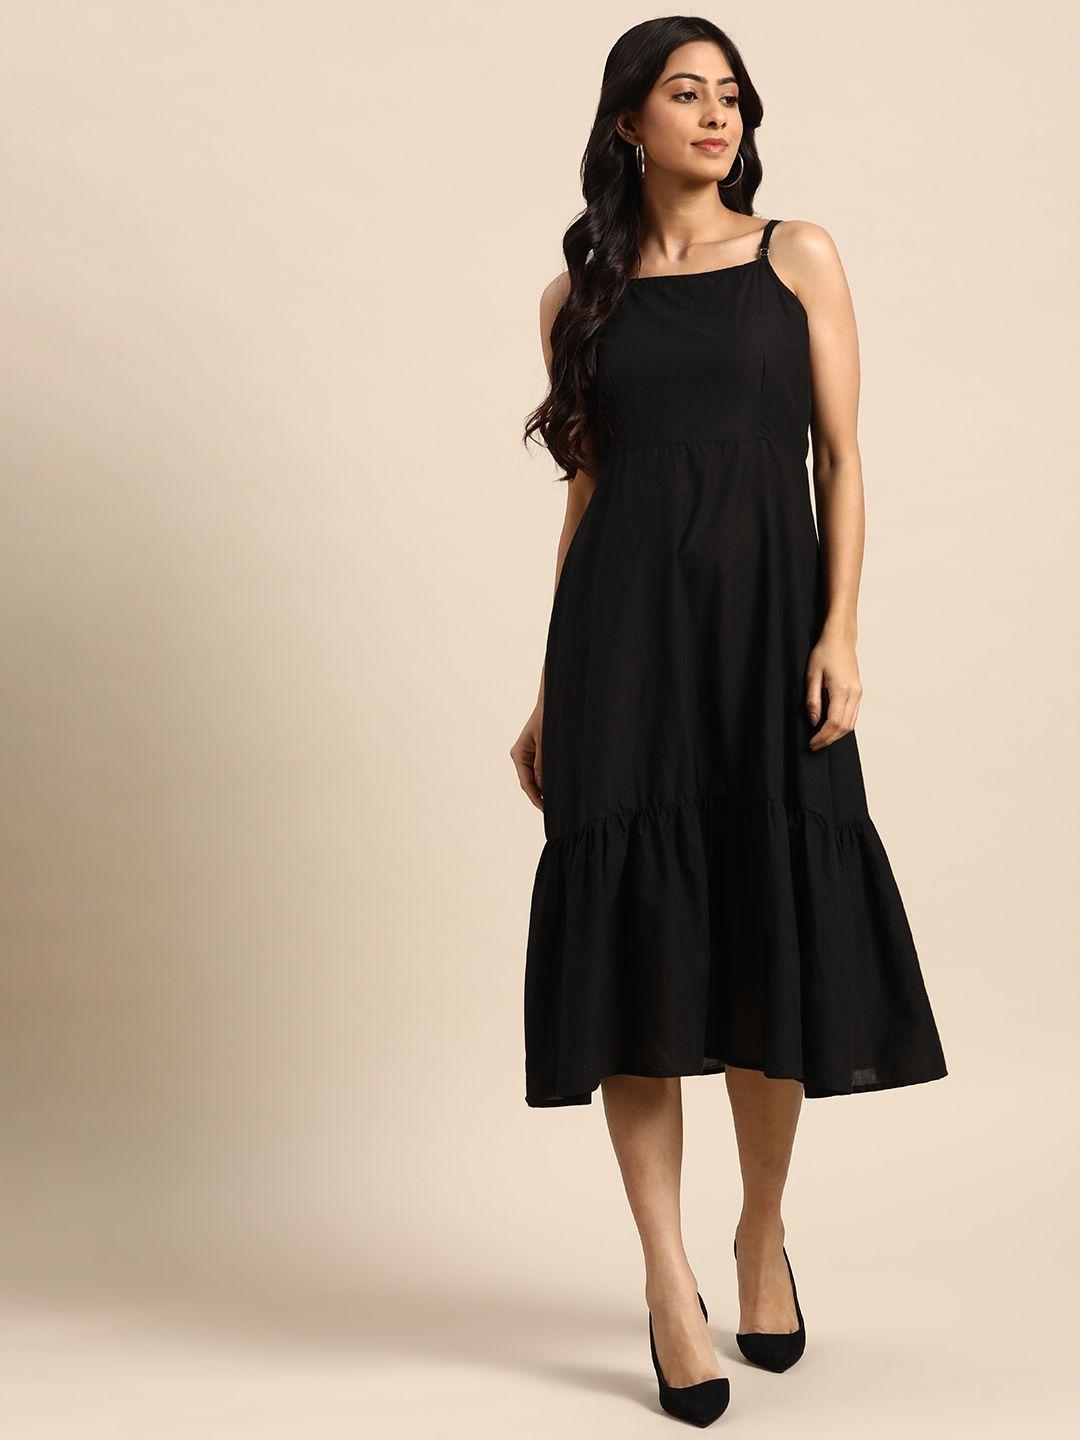 all about you black pure cotton a-line dress